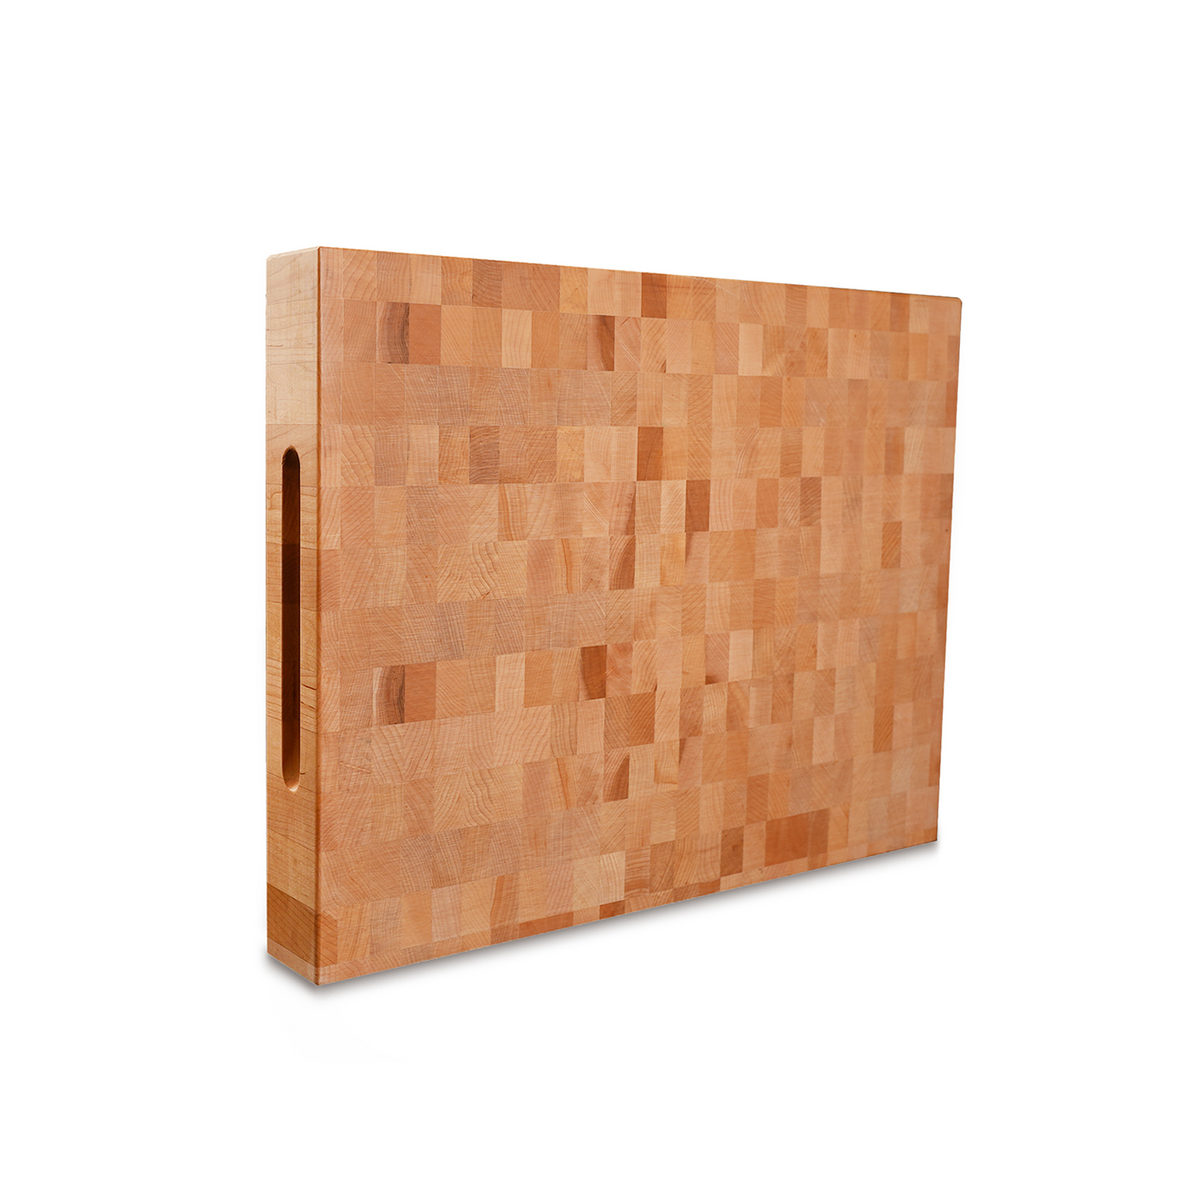 Black Walnut Butcher Block Cutting Board with Invisible Inner